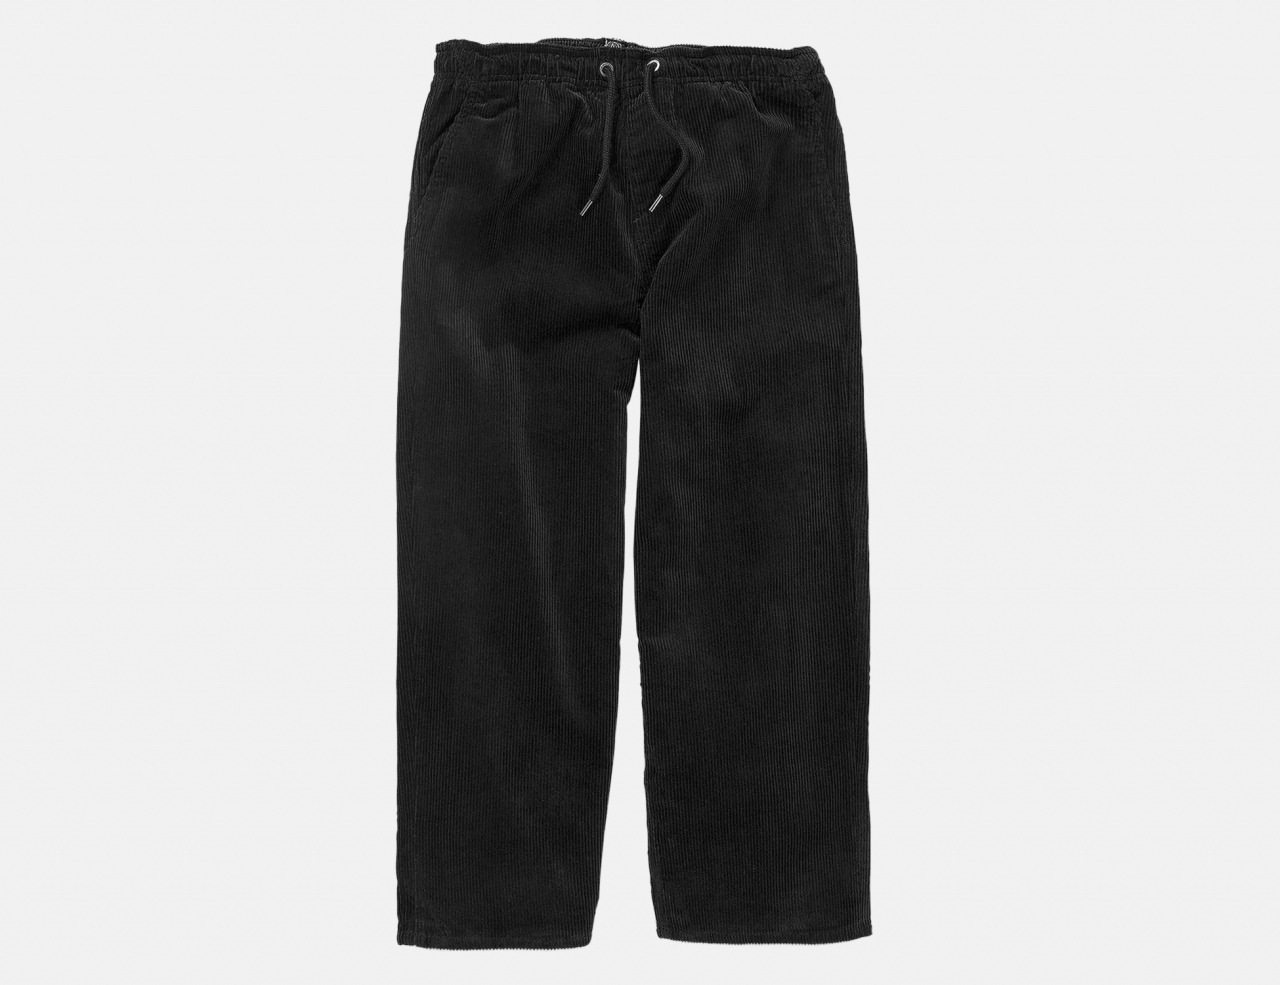 Volcom Outer Spaced Elastic Waist Pant - New Black